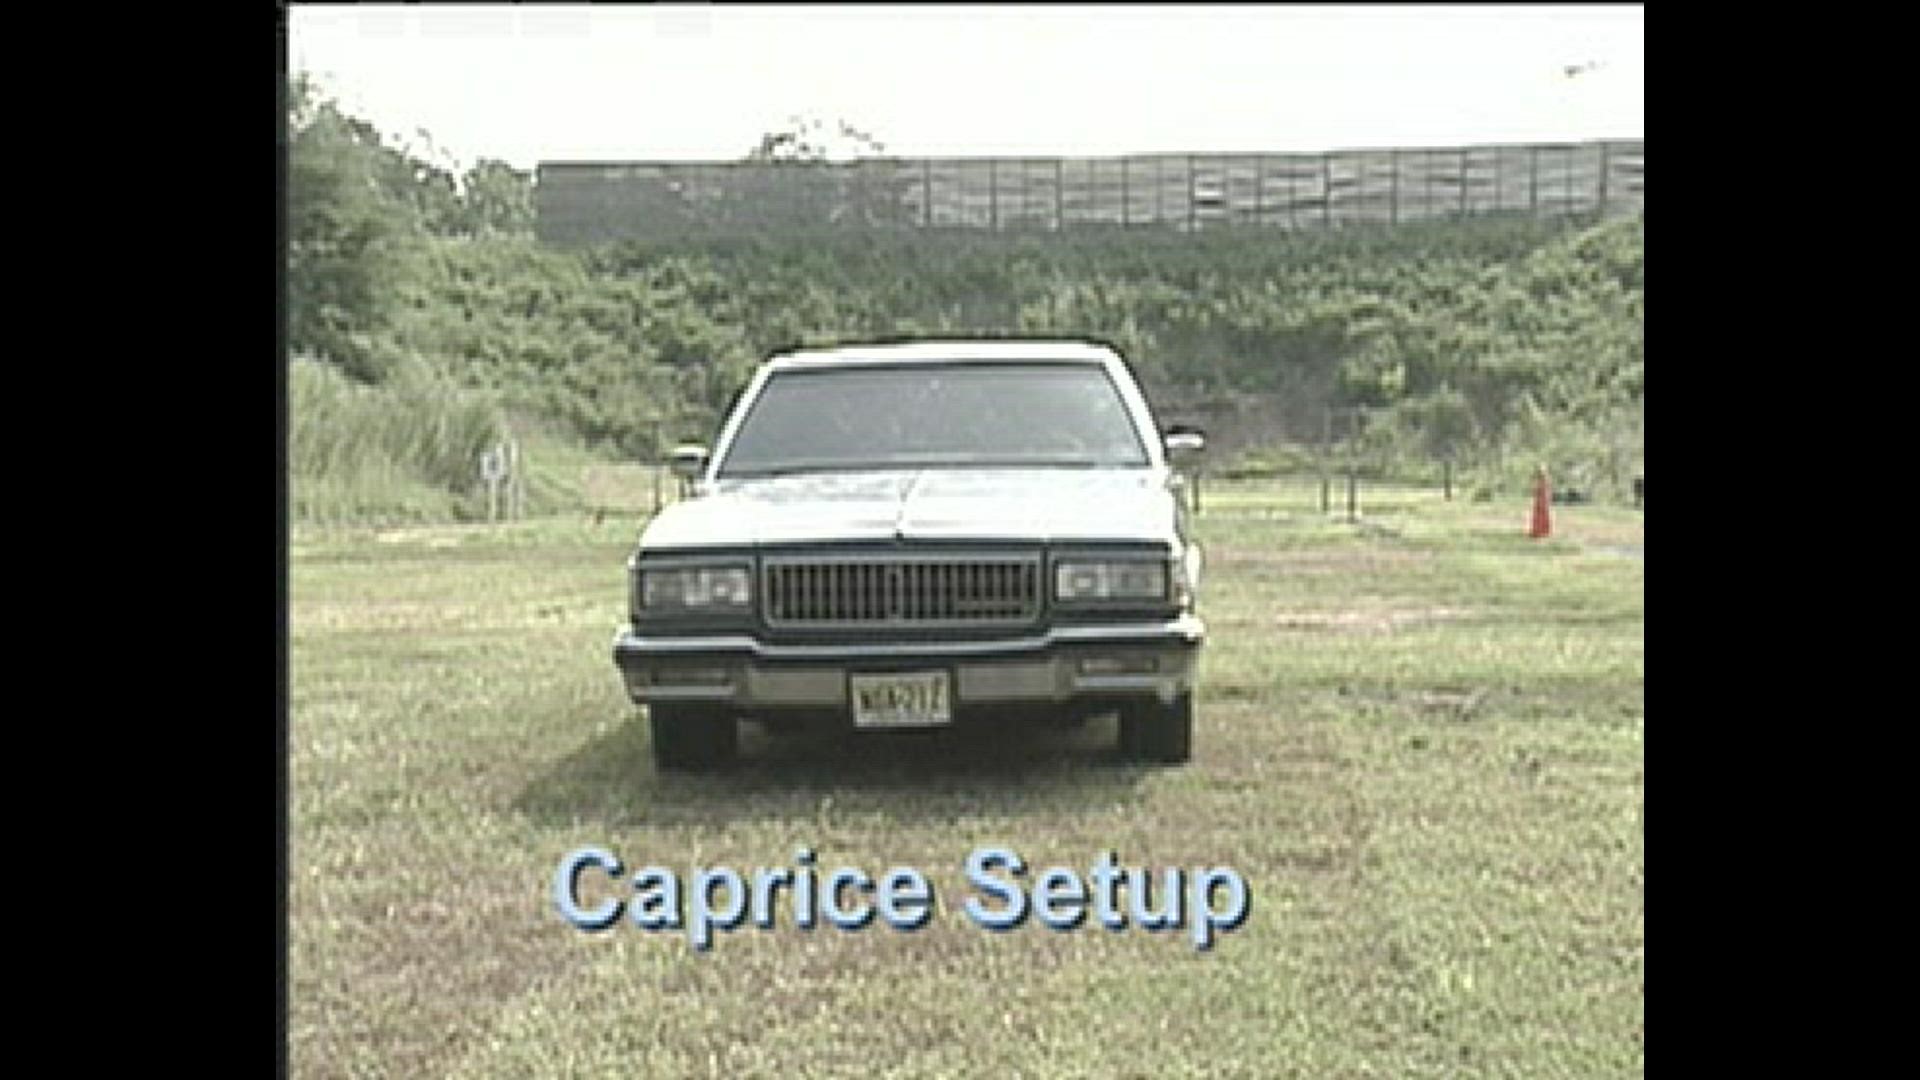 ATF produced this video to demonstrate how detectives believed the suspects used that caprice as a killing machine.